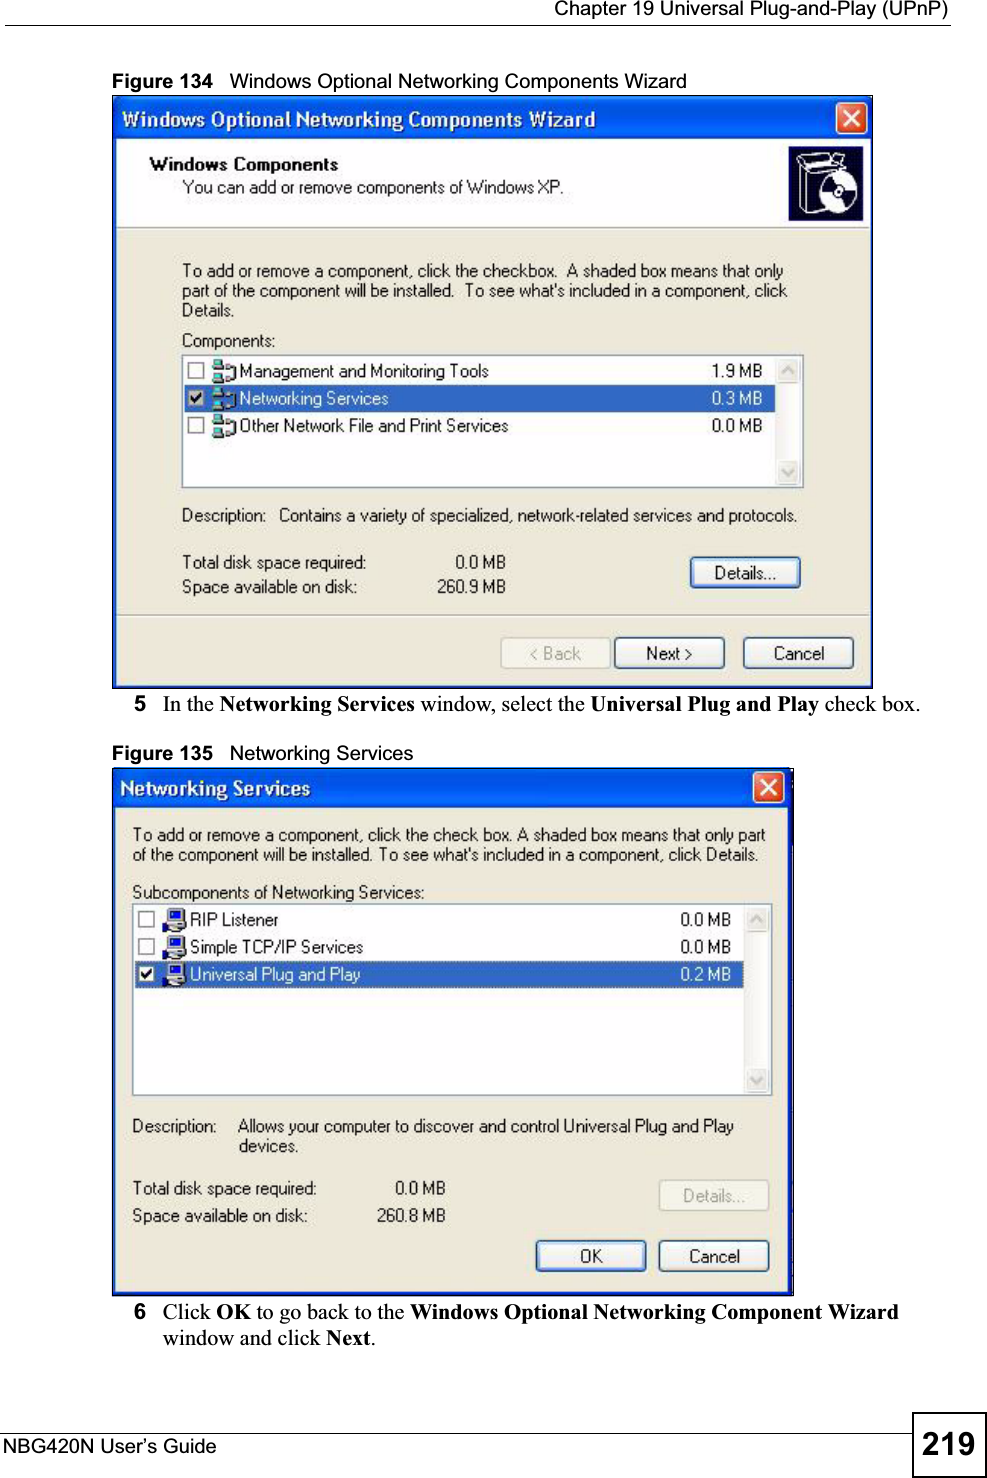  Chapter 19 Universal Plug-and-Play (UPnP)NBG420N User’s Guide 219Figure 134   Windows Optional Networking Components Wizard5In the Networking Services window, select the Universal Plug and Play check box. Figure 135   Networking Services6Click OK to go back to the Windows Optional Networking Component Wizard window and click Next.